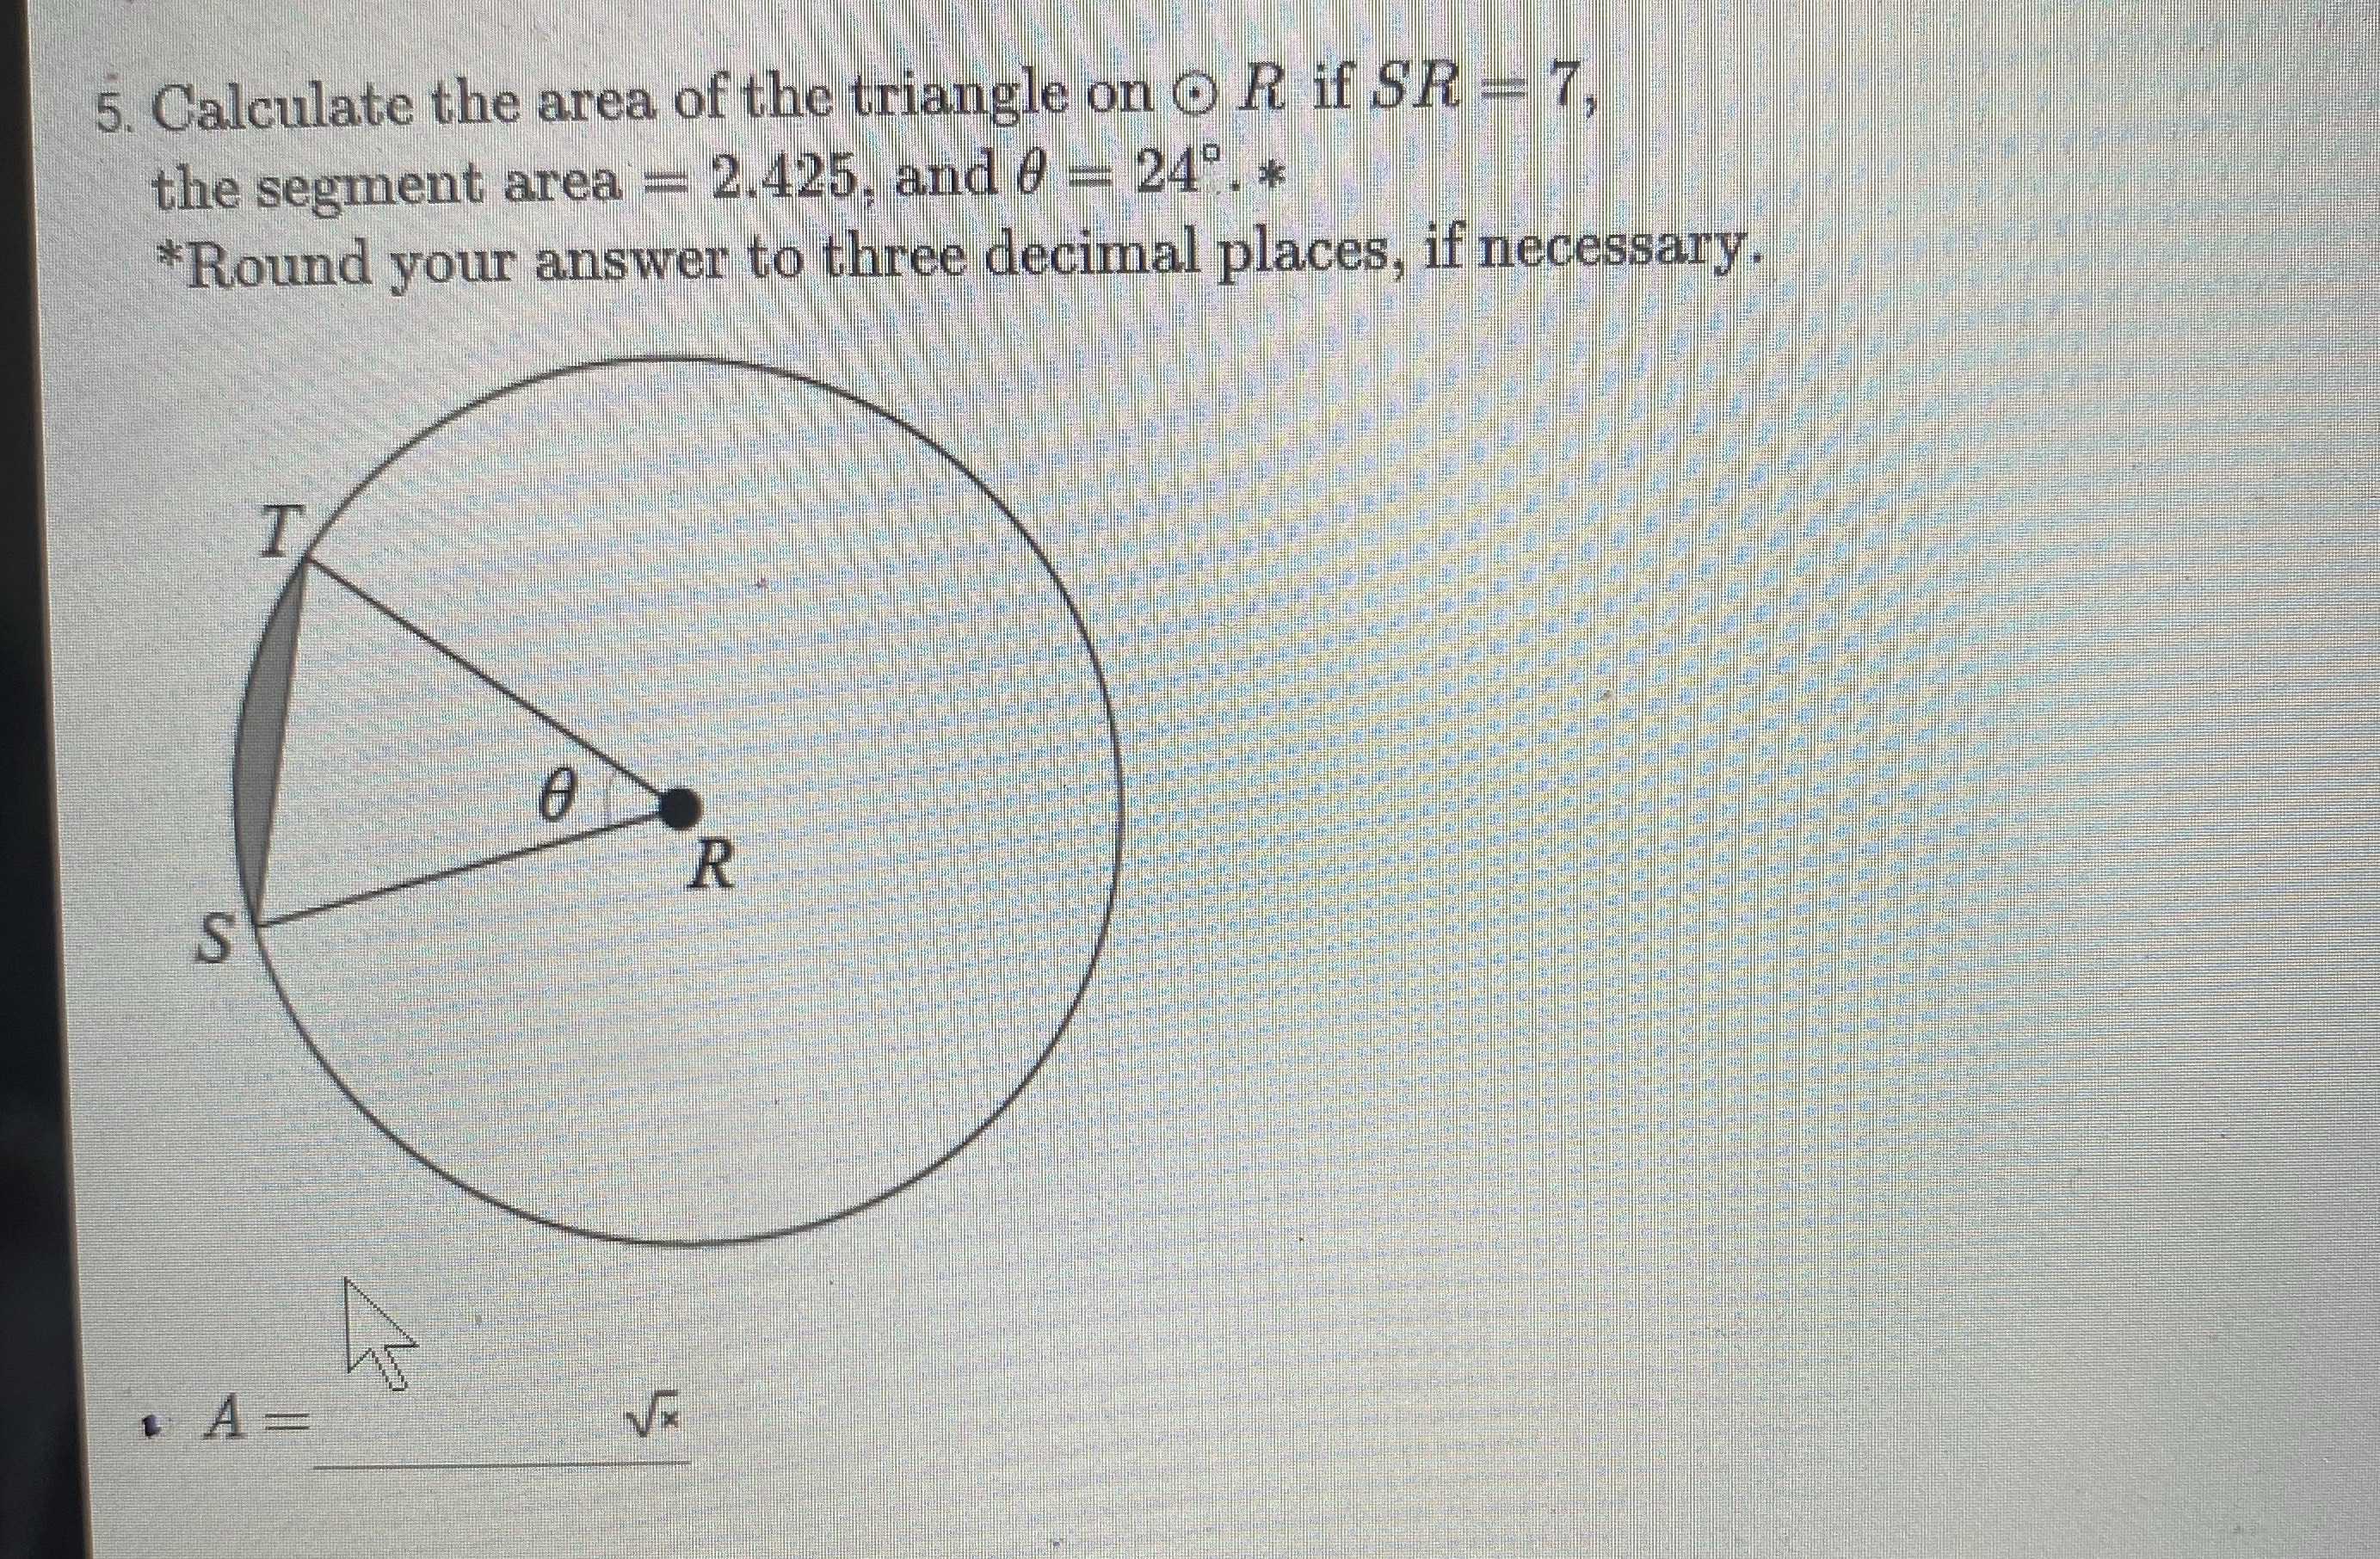 Calculate the area of the triangle on \( \odot R \...